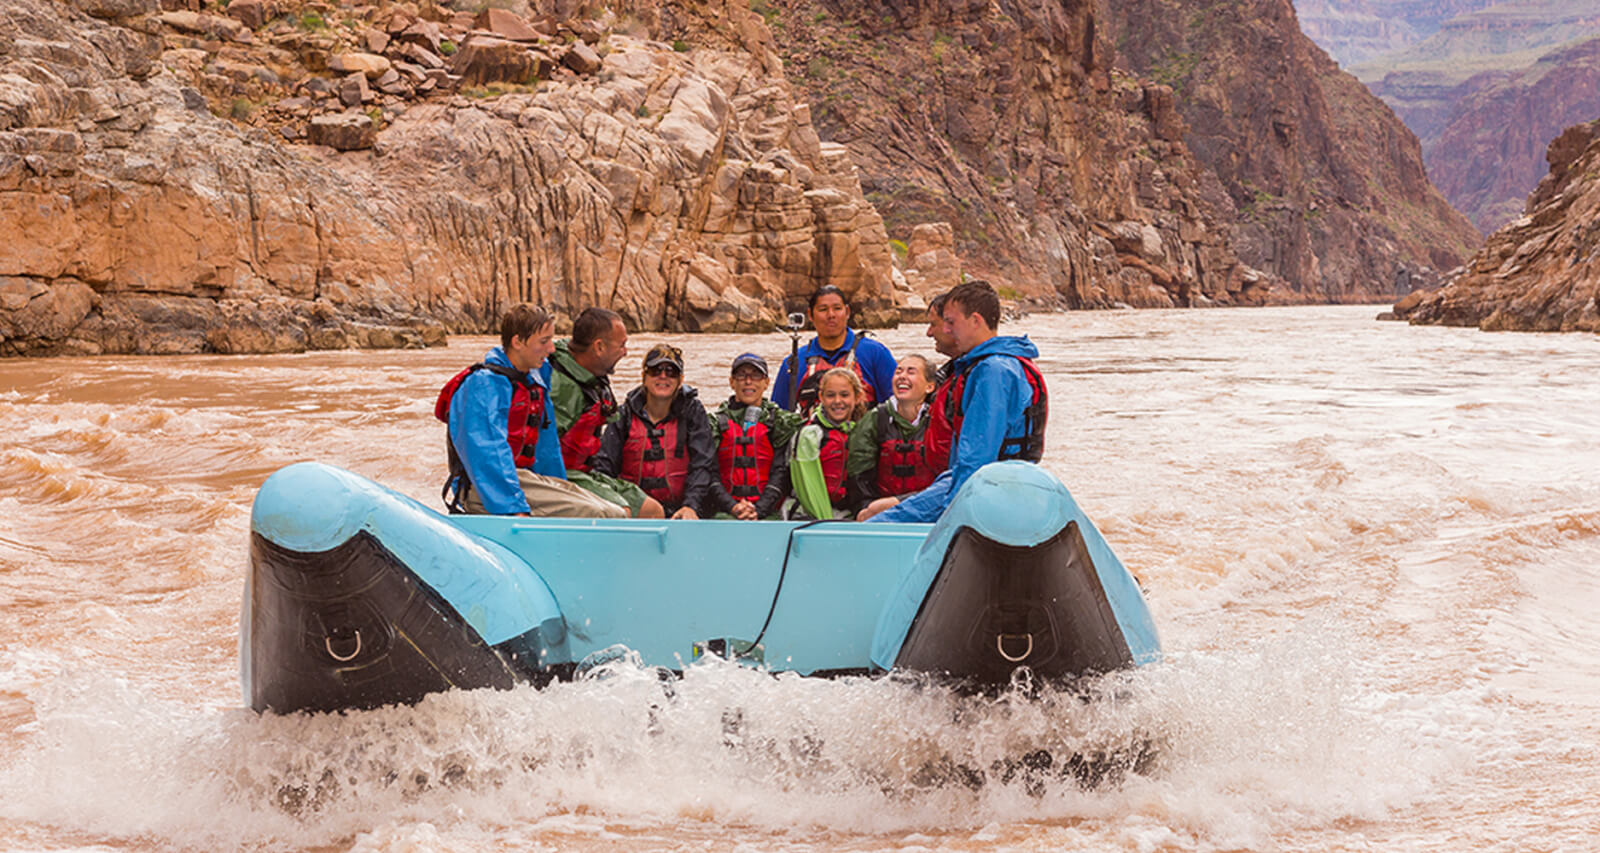 Hualapai River Runners whitewater rafting trip on Colorado River